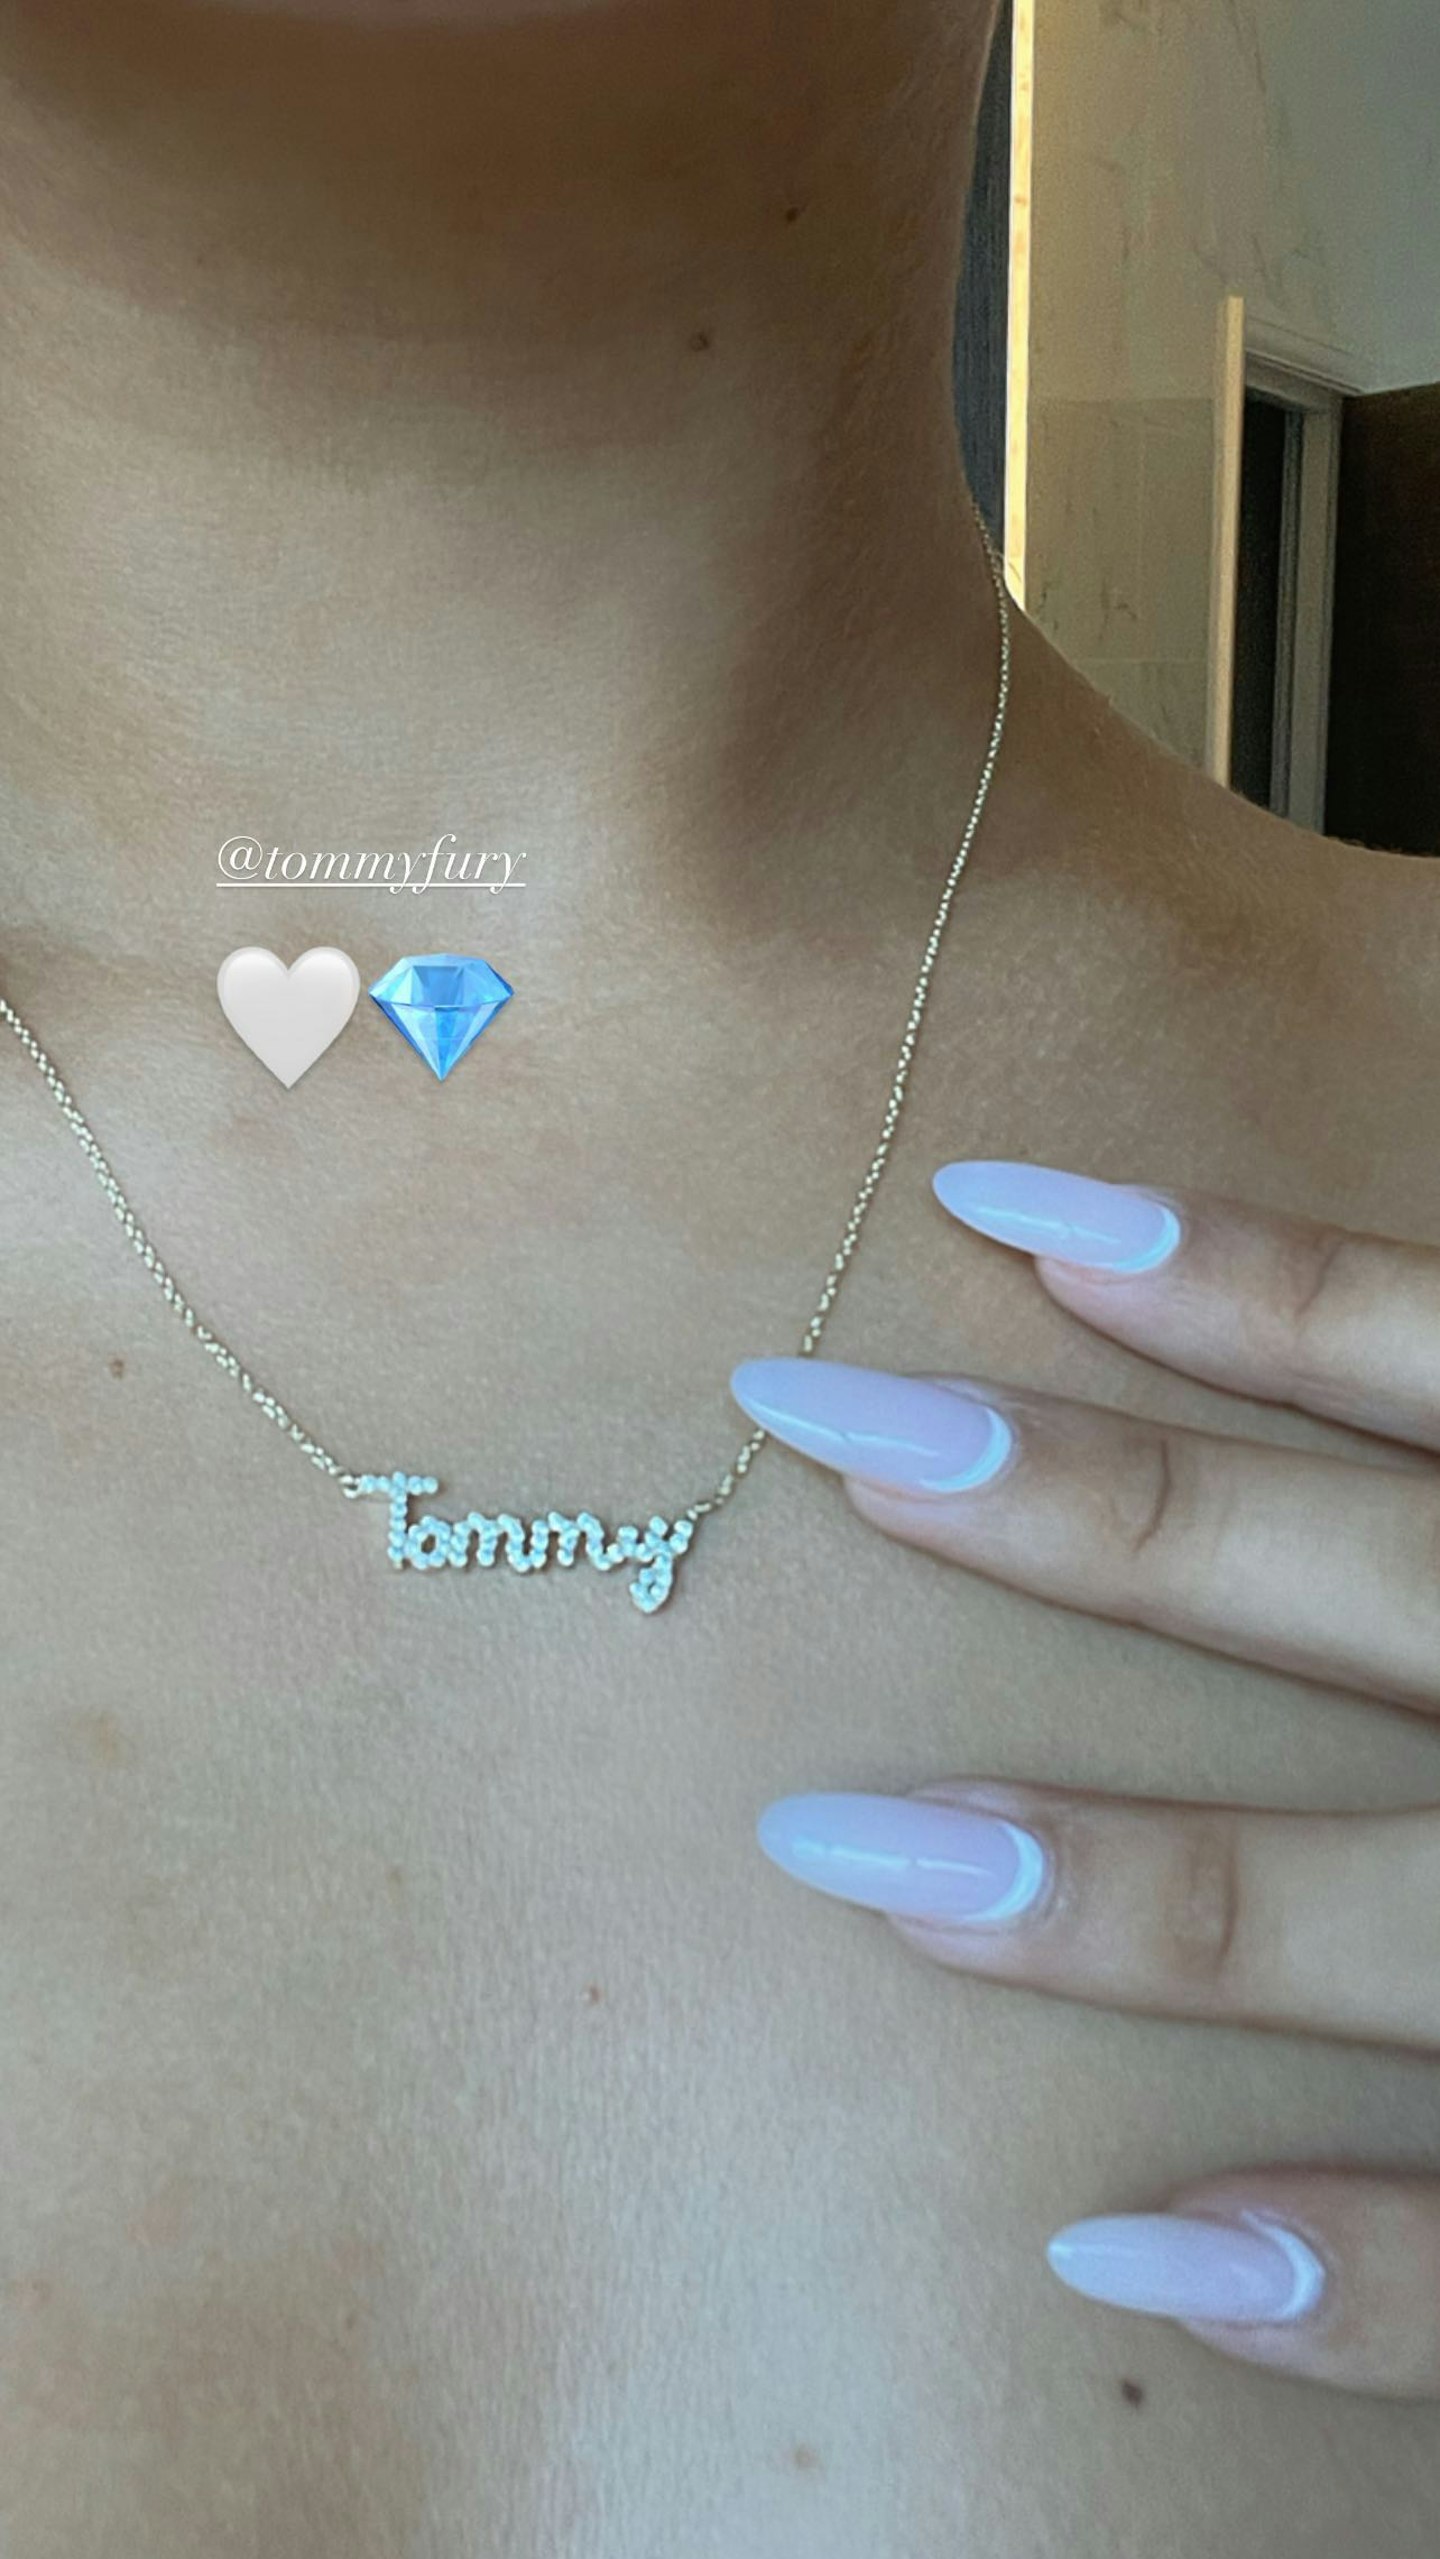 Molly Mae shows off her new 'Tommy' necklace